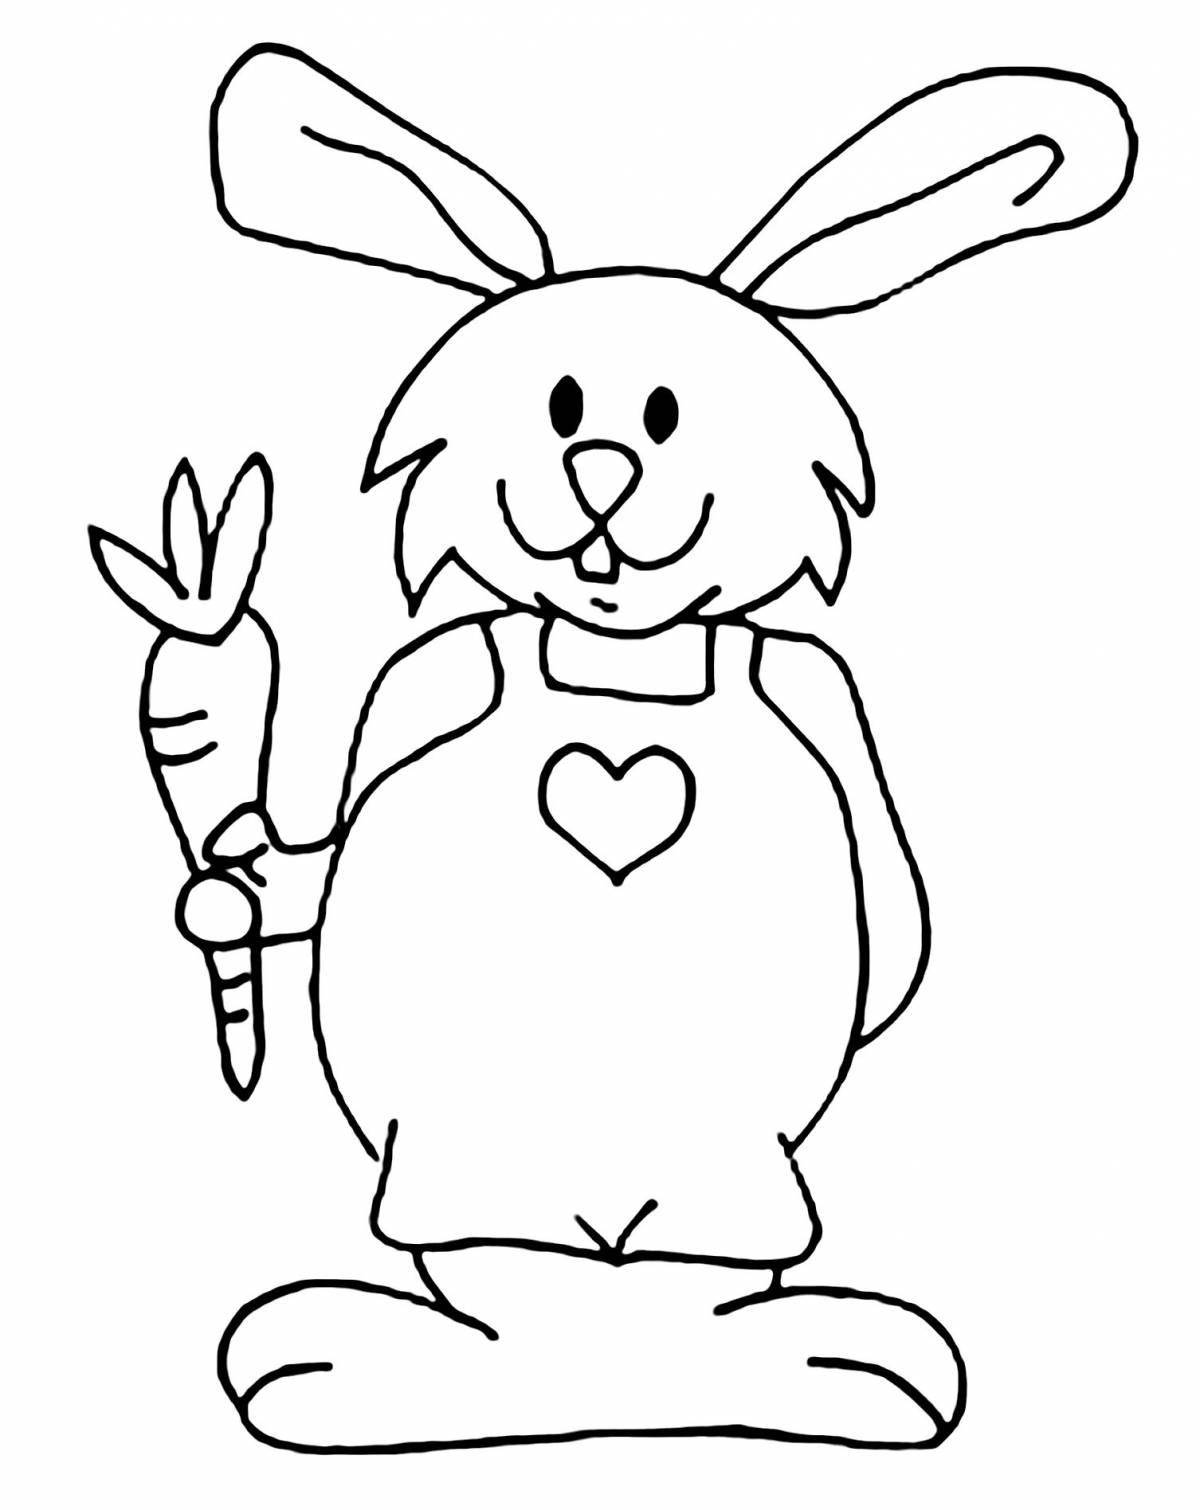 Coloring book festive year of the hare